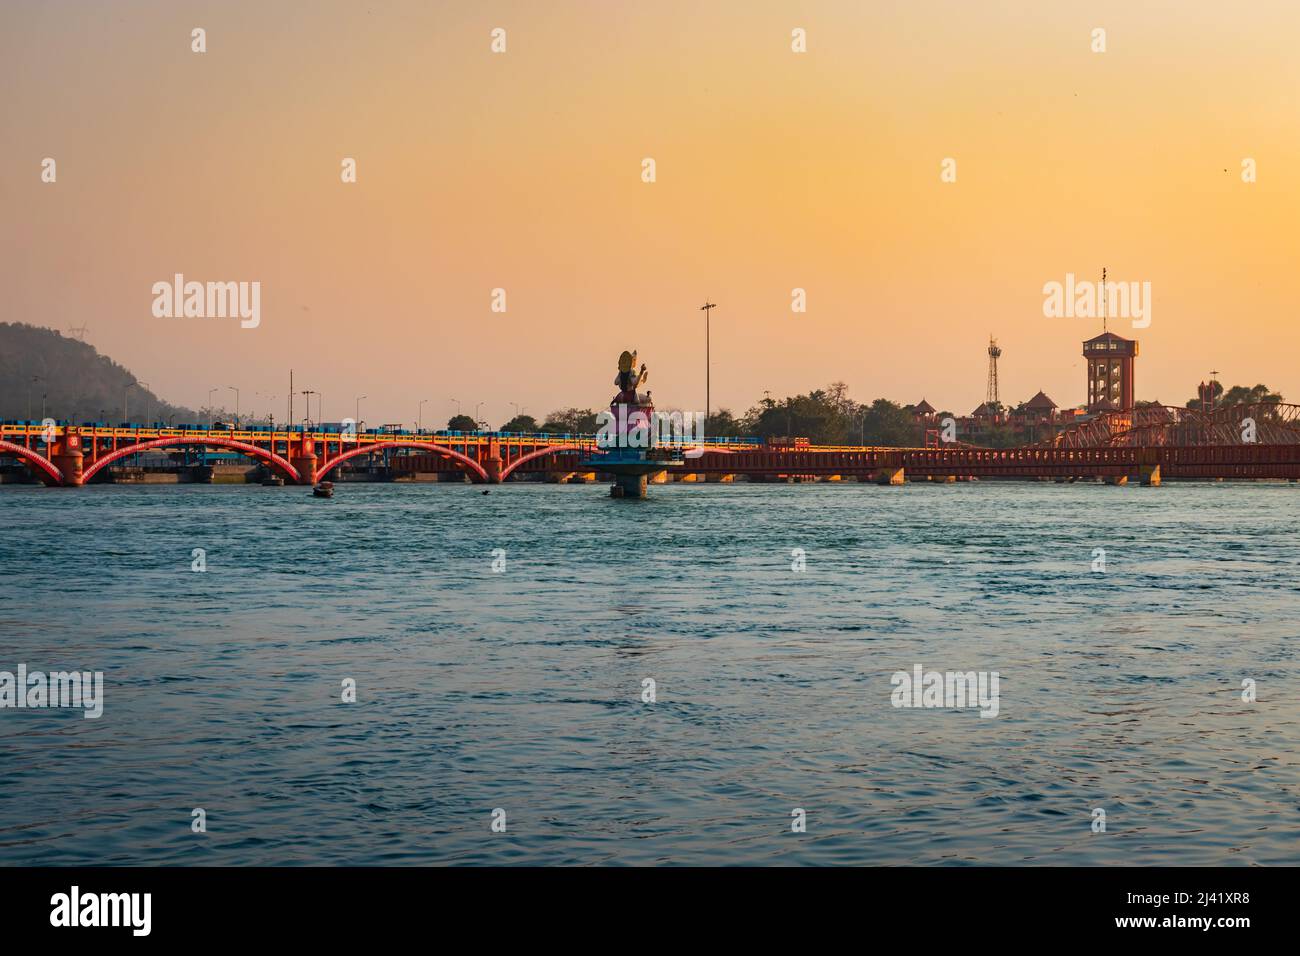 isolated iron bridge and hindu goddess statue over ganges river with colorful sky at evening image is taken at haridwar uttrakhand india. Stock Photo